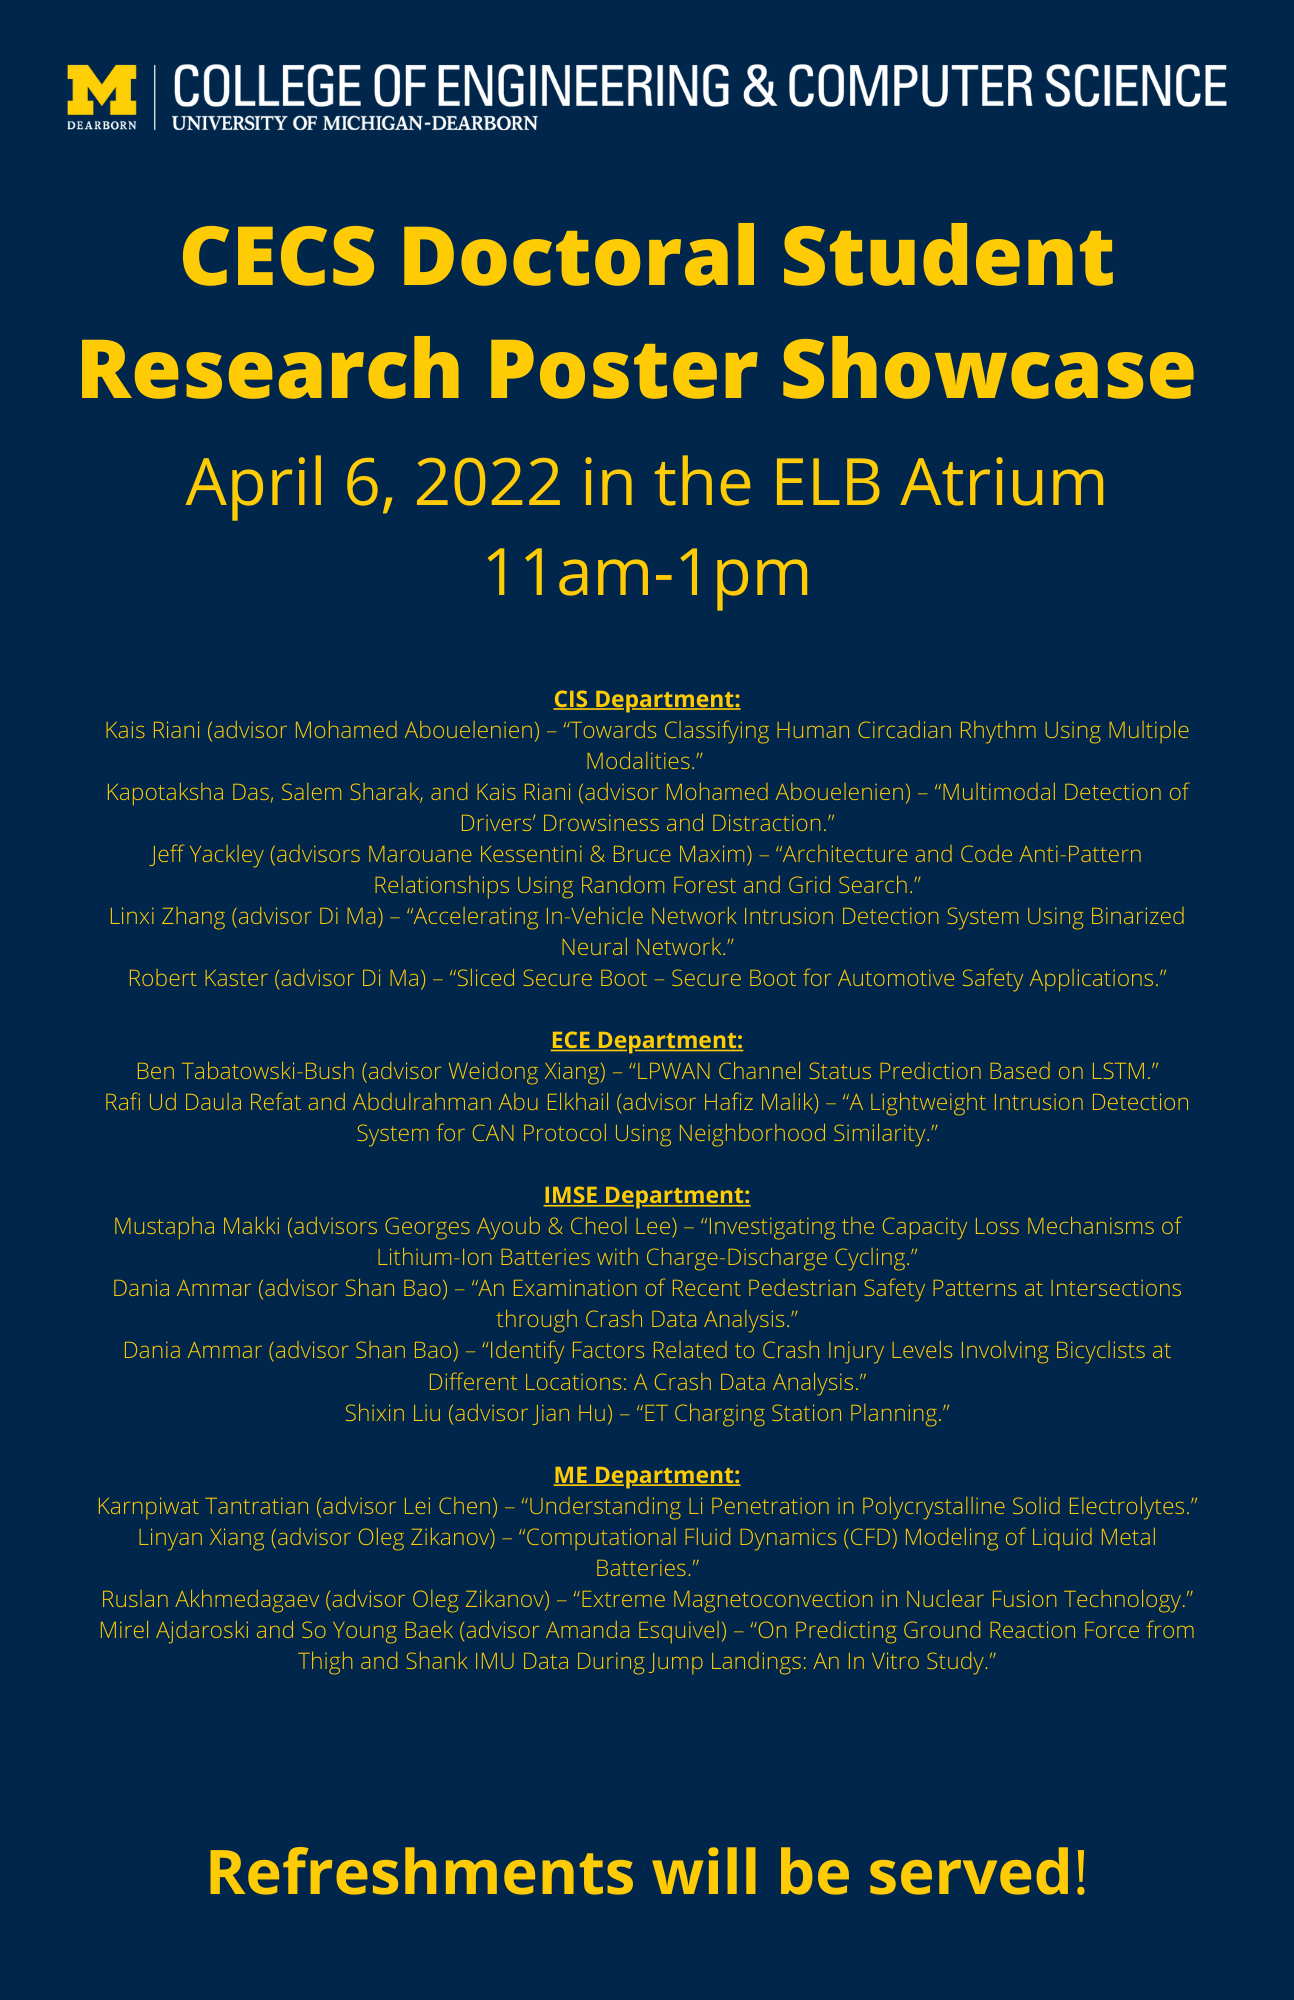 CECS Doctoral Student Research Poster Showcase Flyer